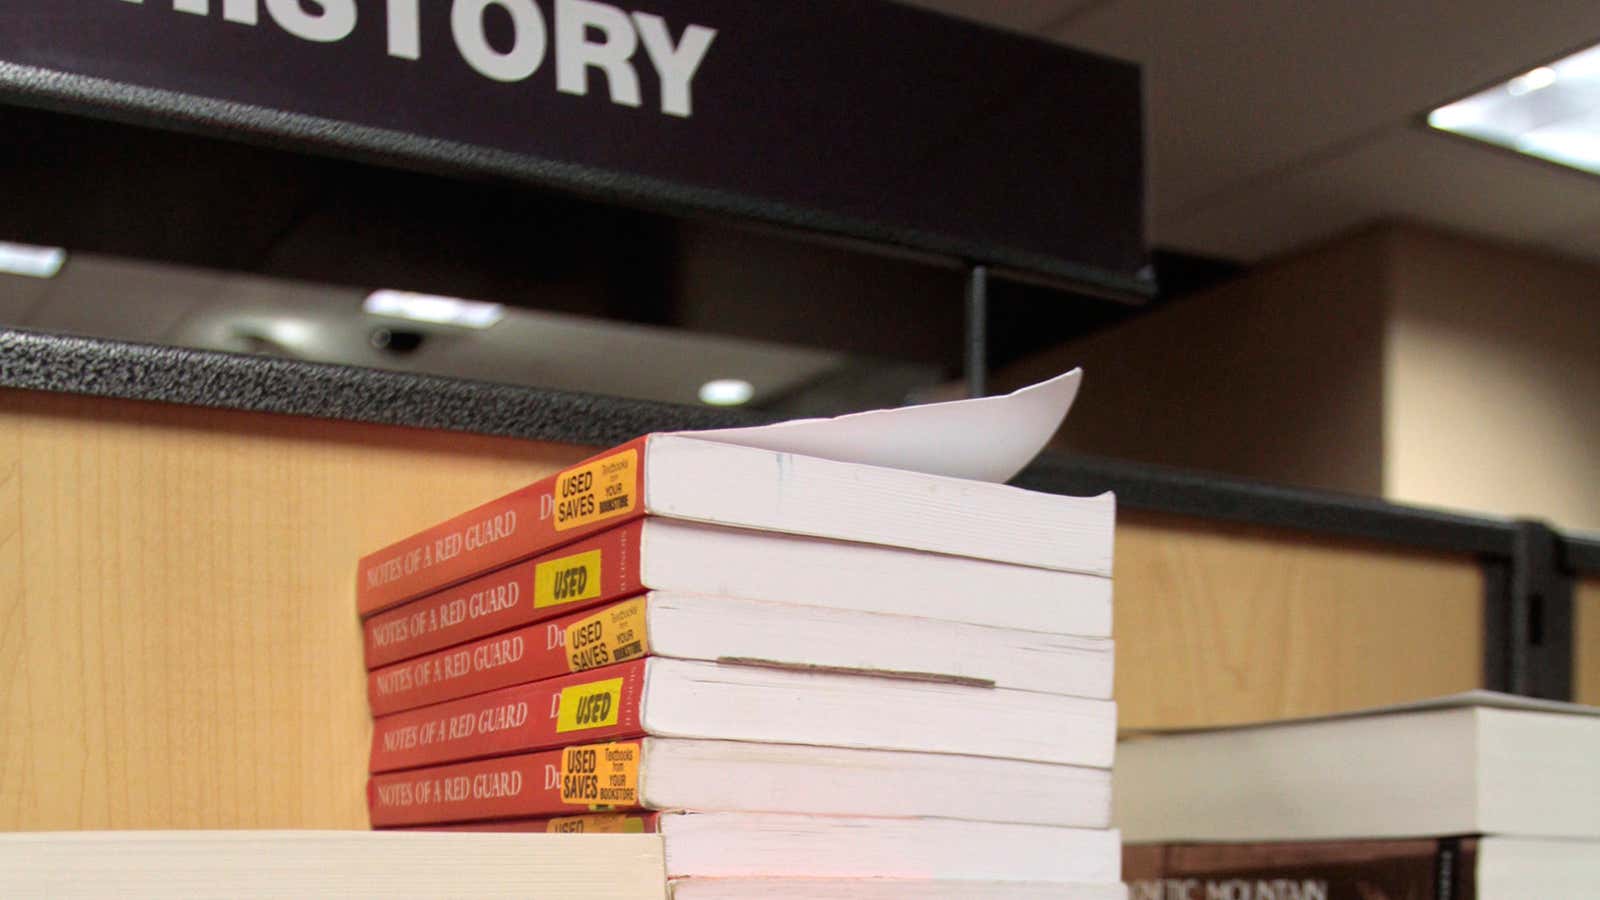 States are realizing that college textbooks are “prohibitively expensive”